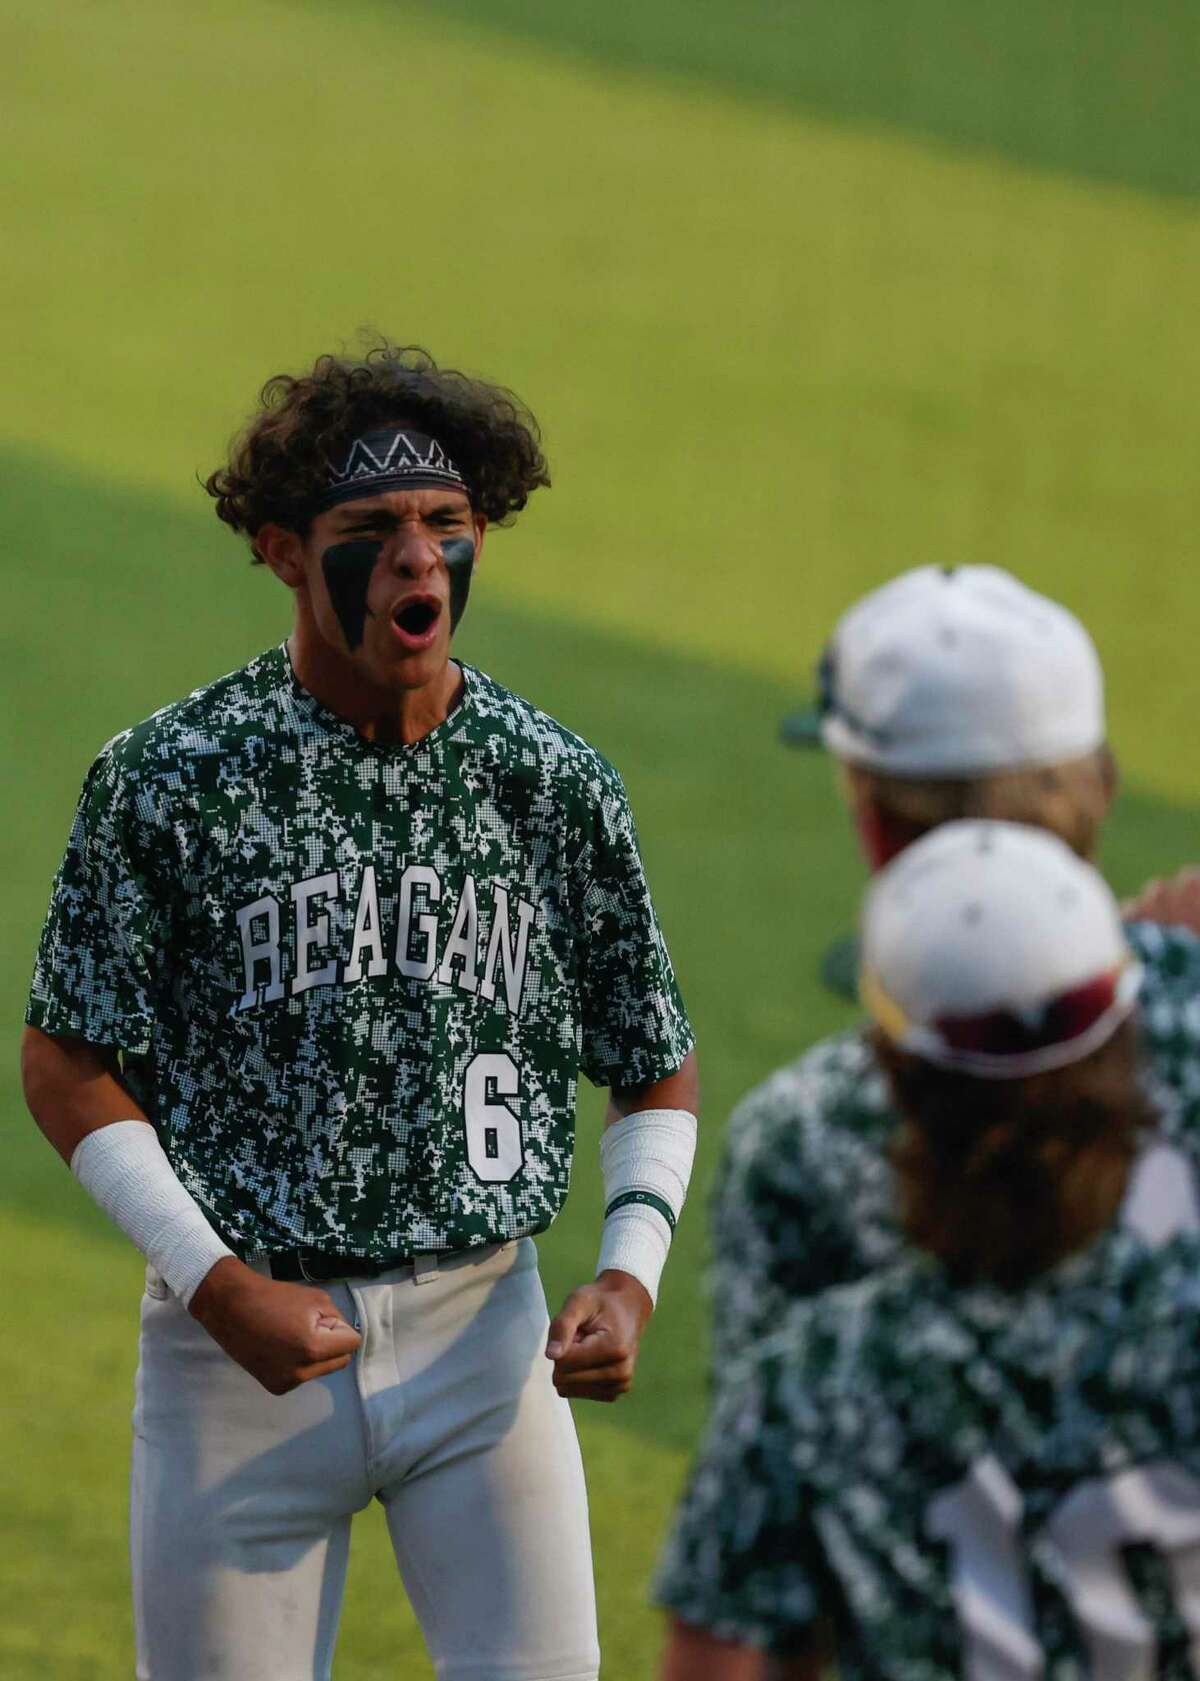 Reagan's Jeter Battles (6) celebrates as his team makes a second run in the fourth inning against the Lake Travis Cavaliers during the first game of a best of three Region IV-6A final series at North East Sports Park in San Antonio, TX, Monday, Sept. 20, 2021. The Rattlers took a 1-0 lead in the best of three series by defeating the Cavaliers 3-2 in nine innings.